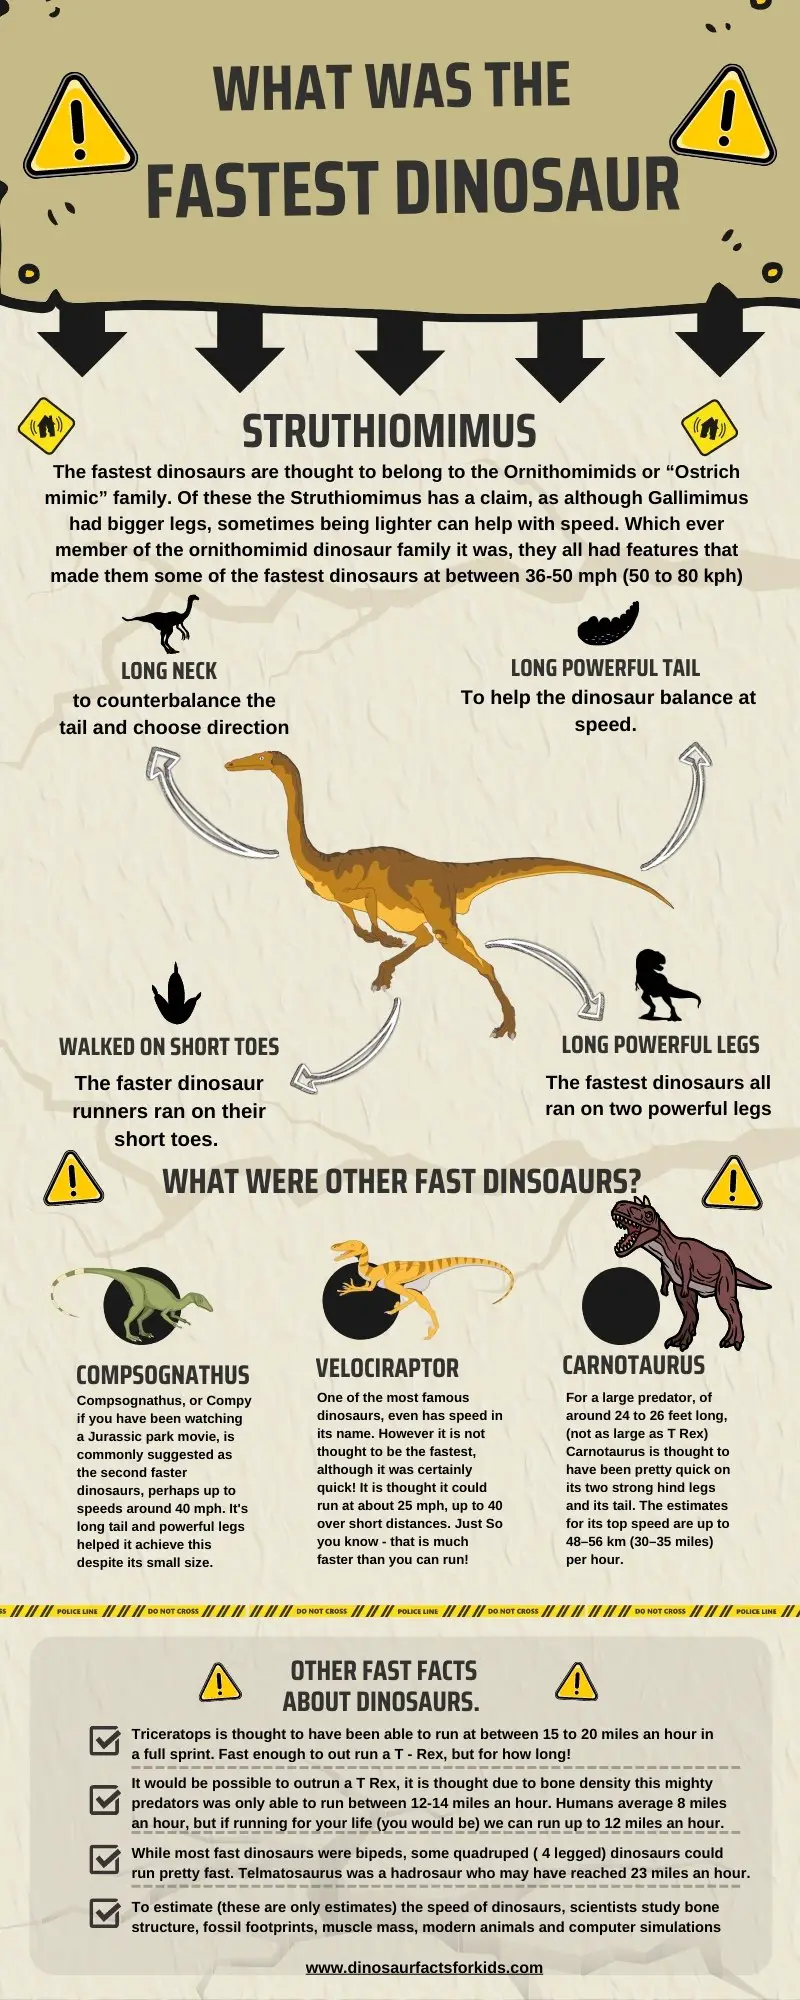 What Was The Fastest Dinosaur? - Dinosaur Facts For Kids